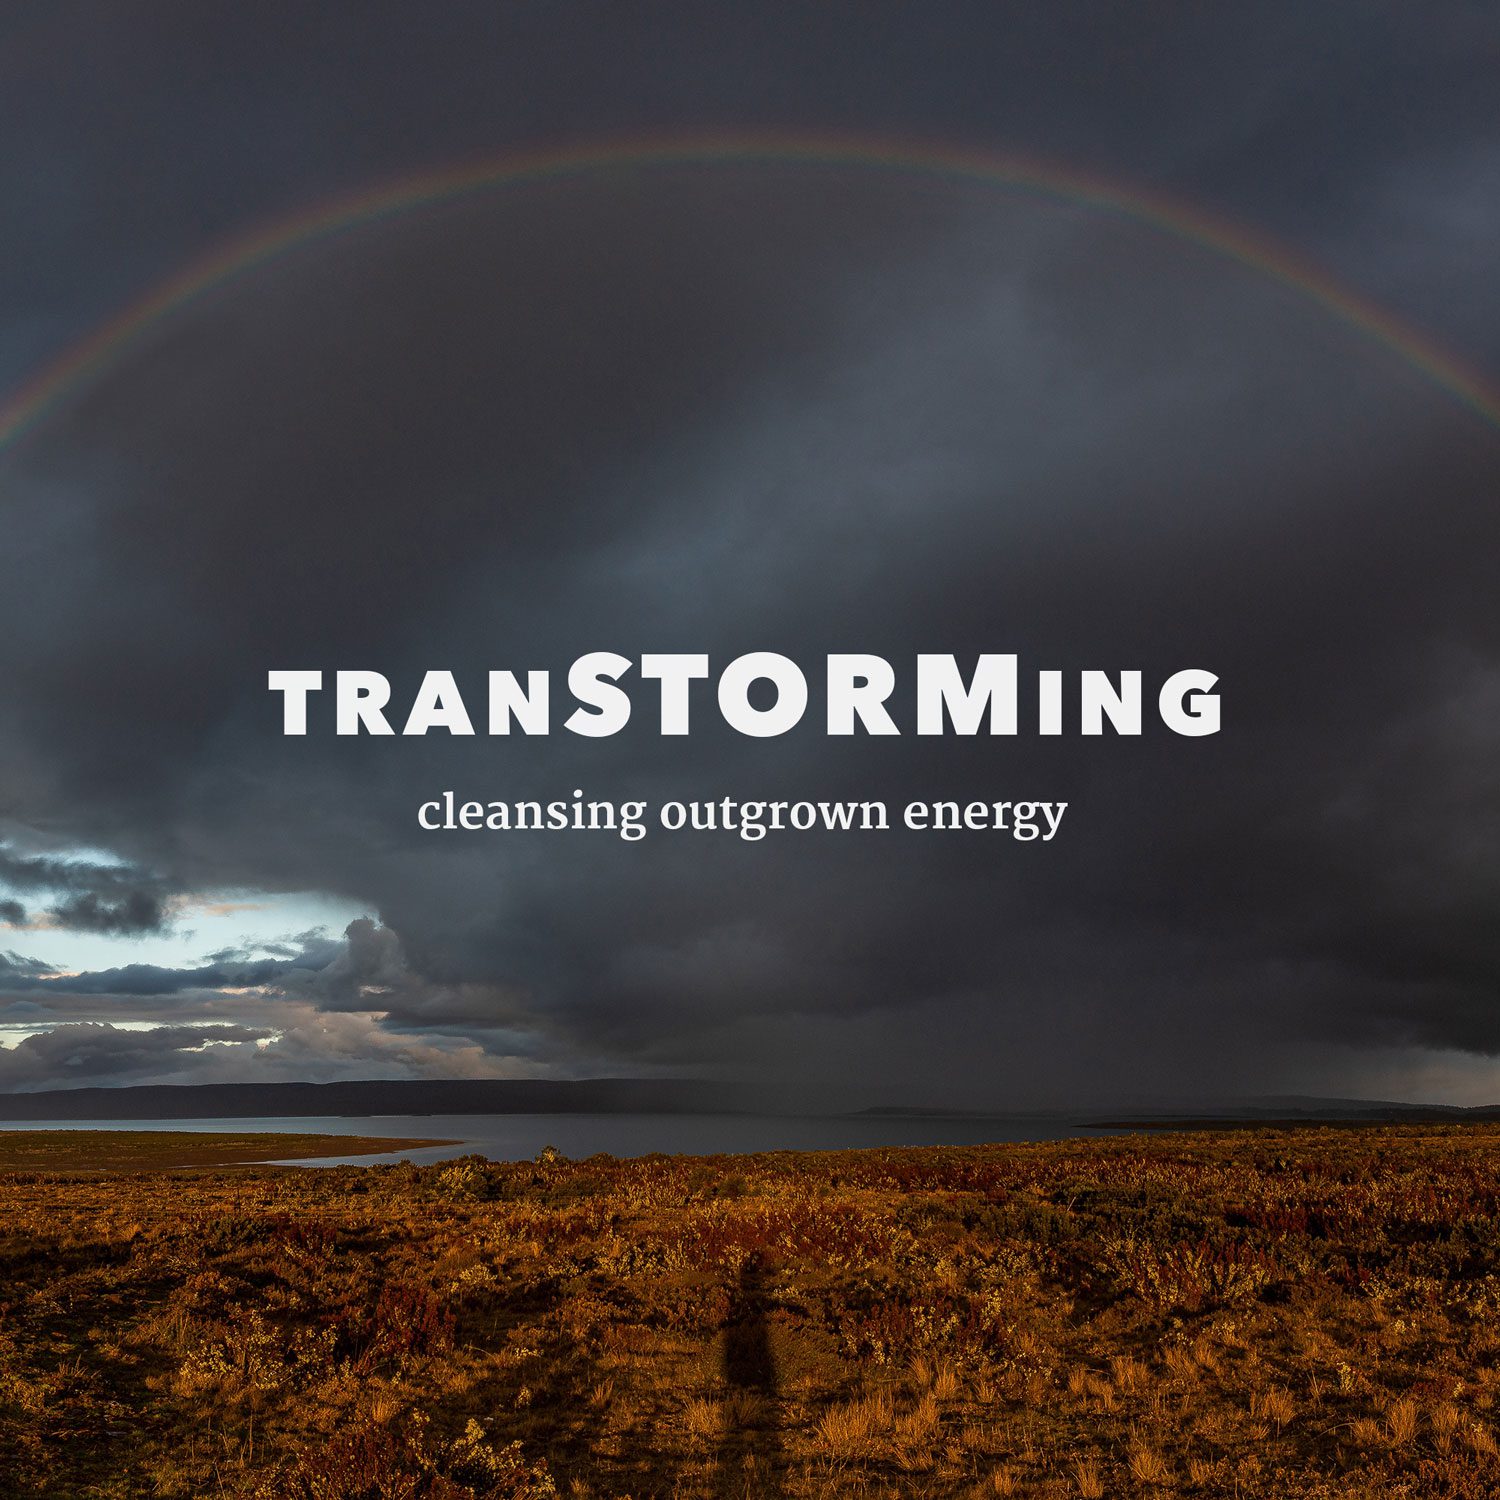 TRANSTORMING - cleansing outgrown energy